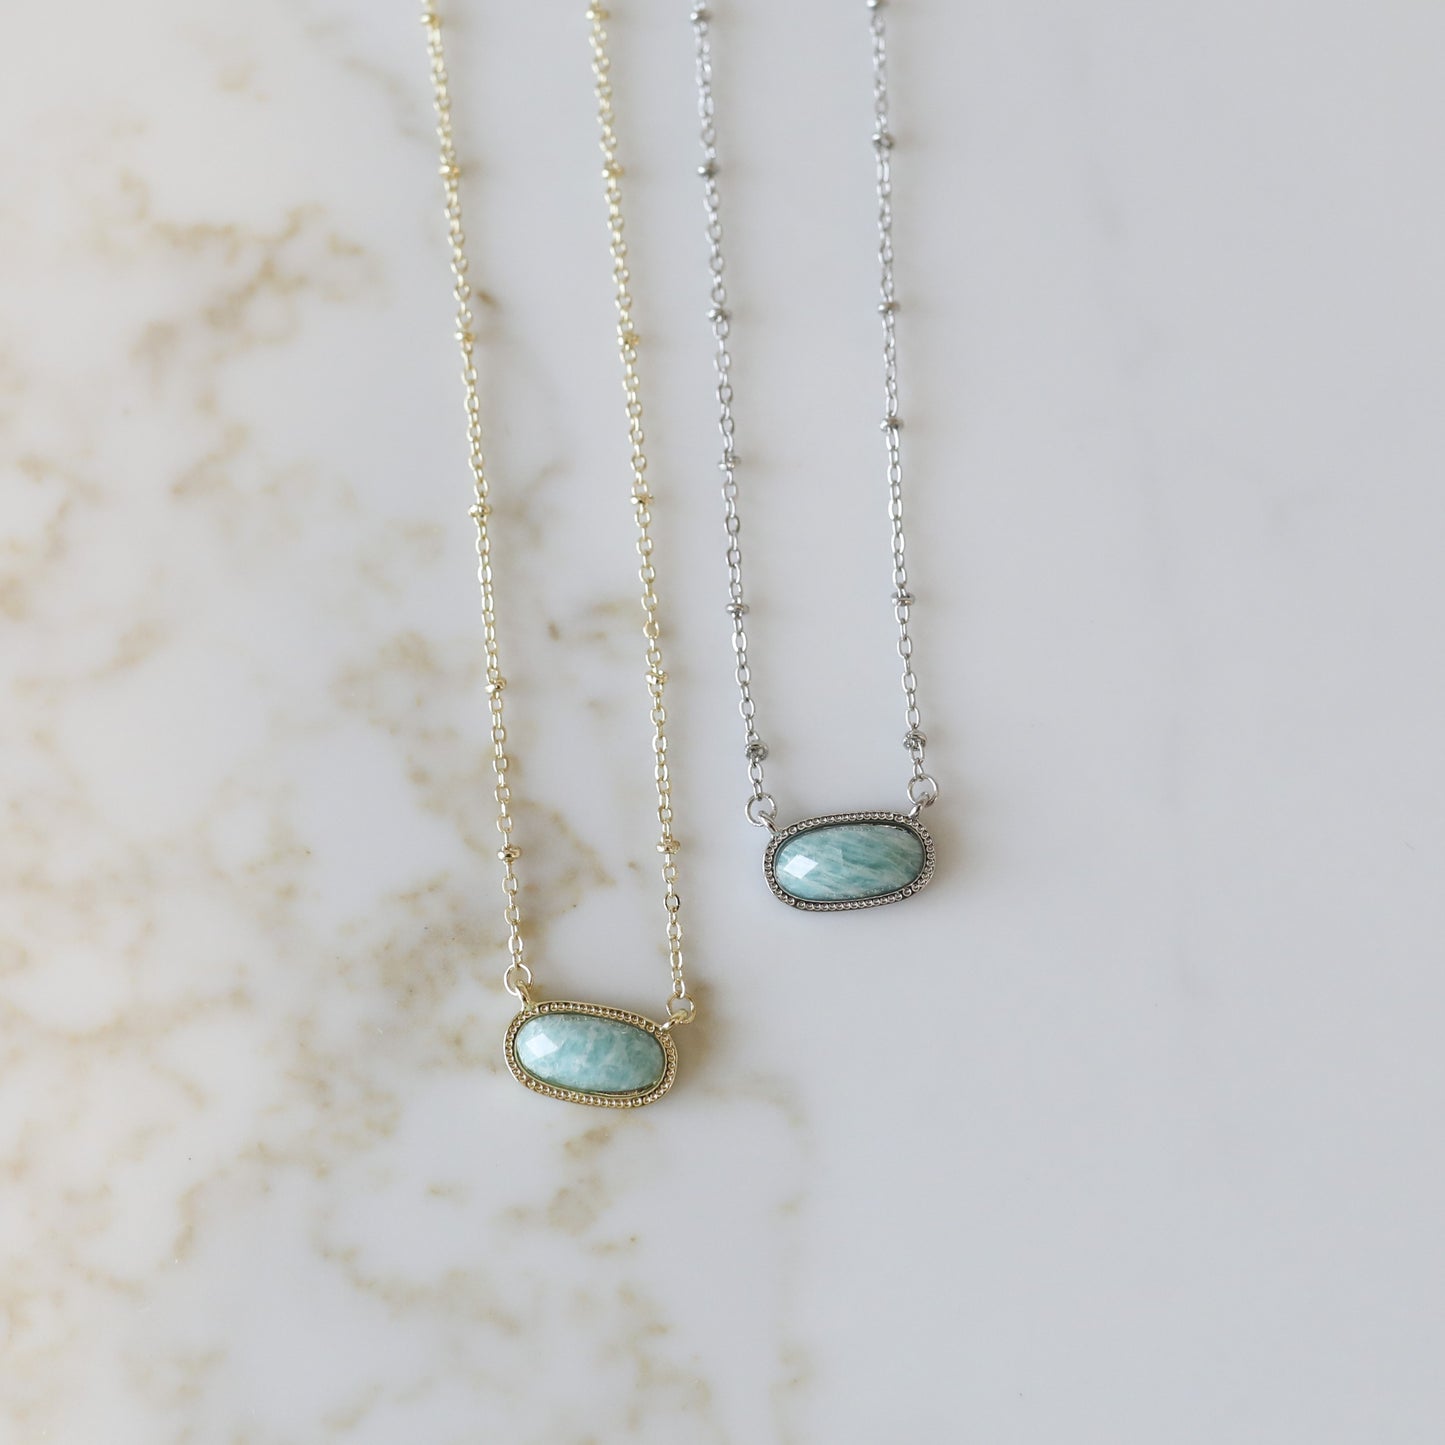 Meaningful Gemstone Necklace in Amazonite available with a Gold or Silver chain